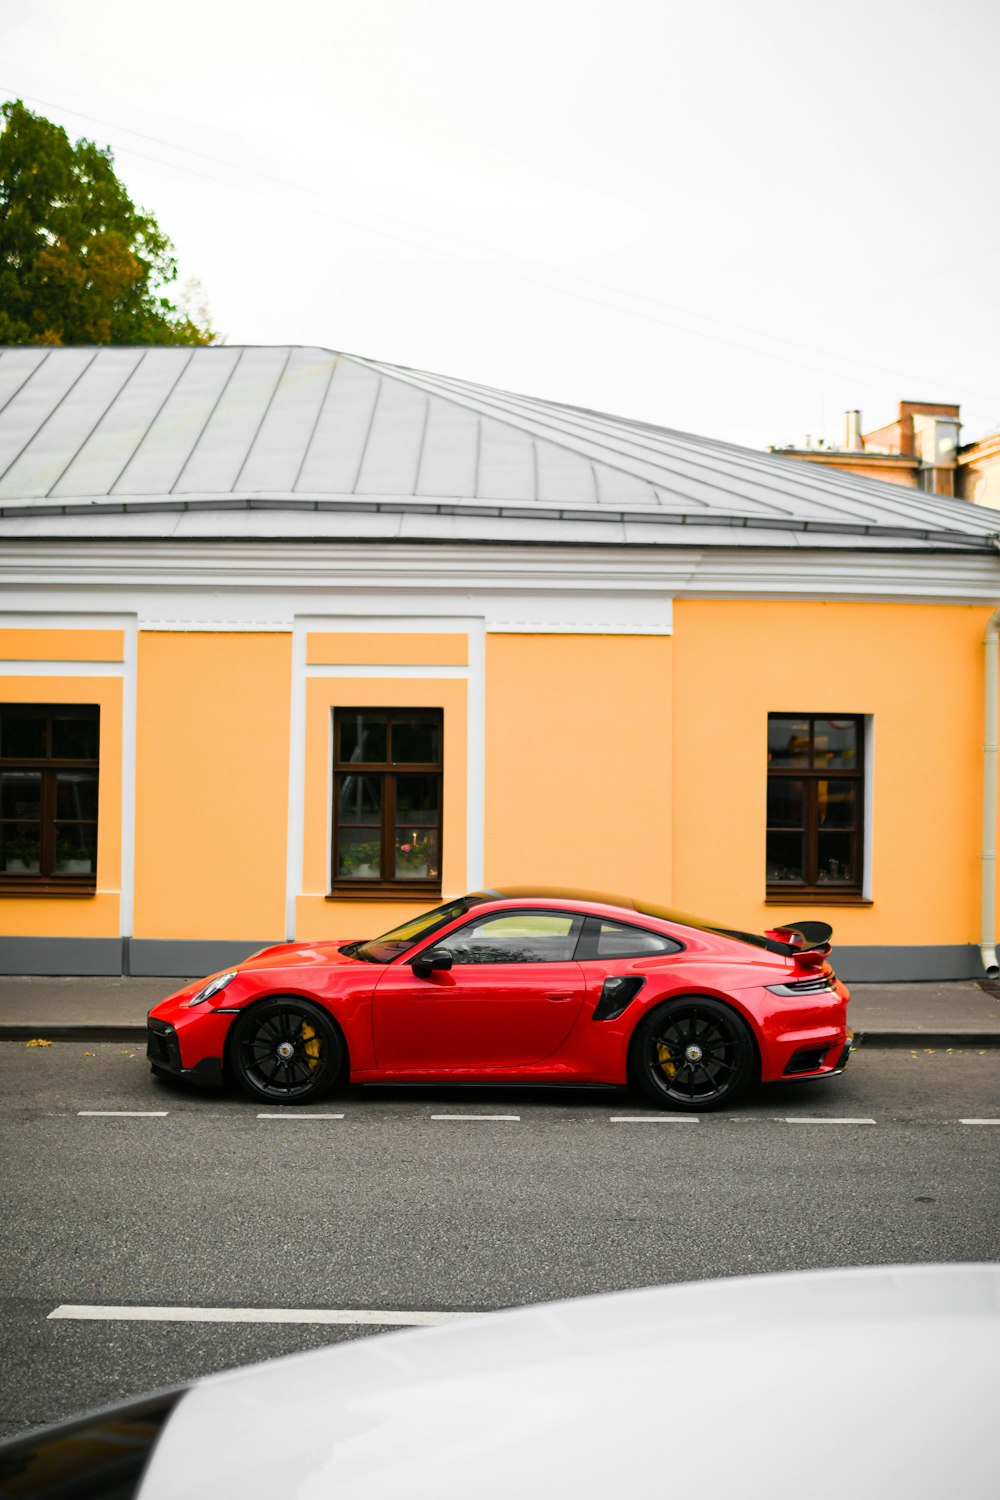 a red sports car parked in front of a yellow building